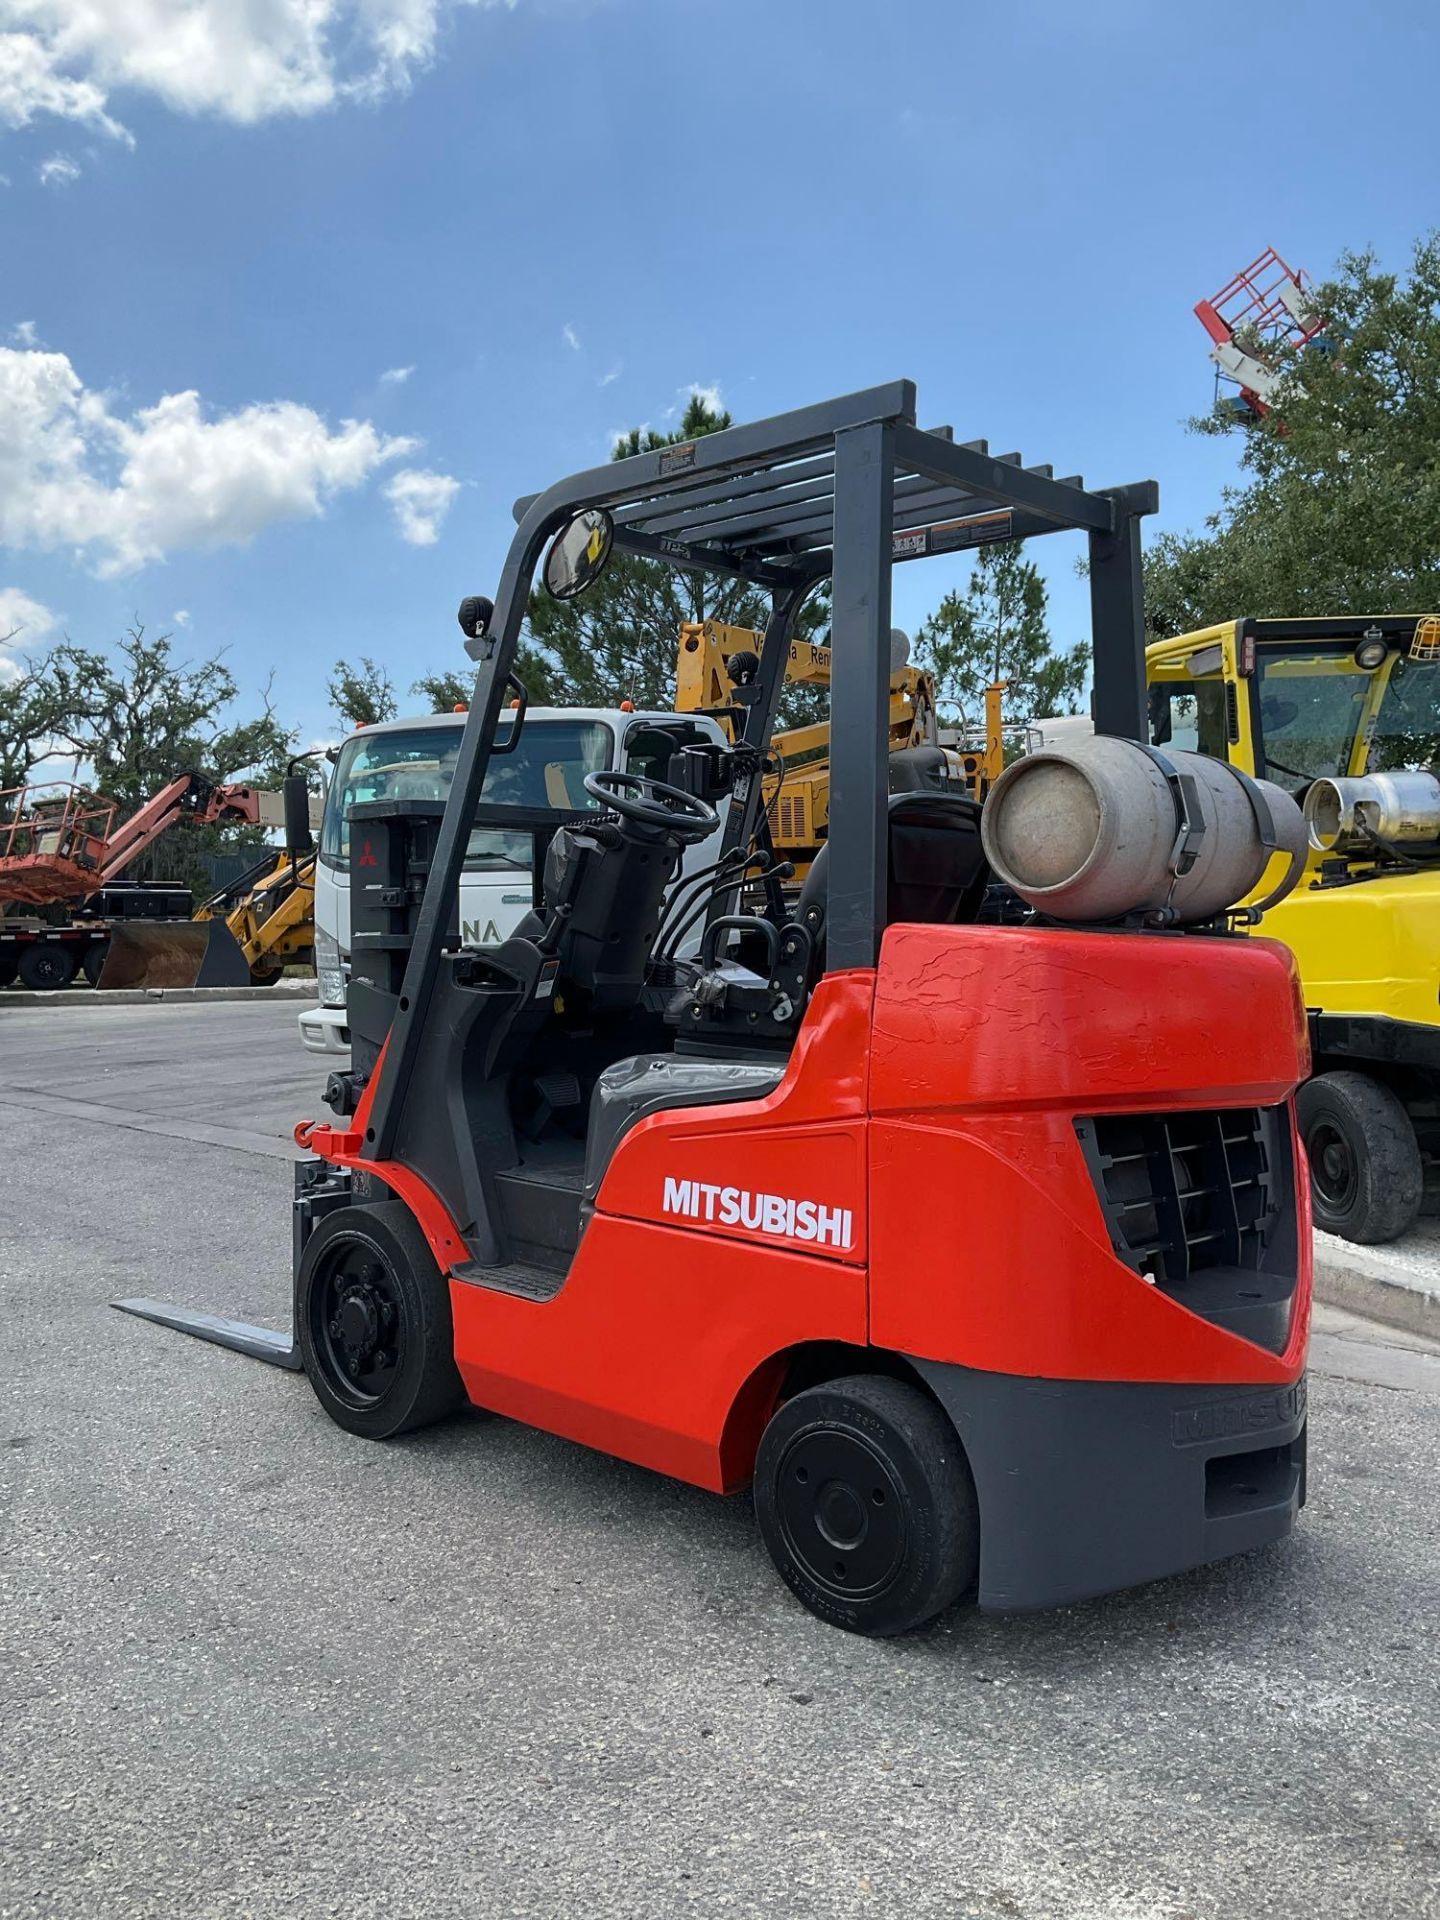 MITSUBISHI FORKLIFT MODEL FGC25N-LP, LP POWERED, APPROX MAX CAPACITY 5000LBS - Image 5 of 13